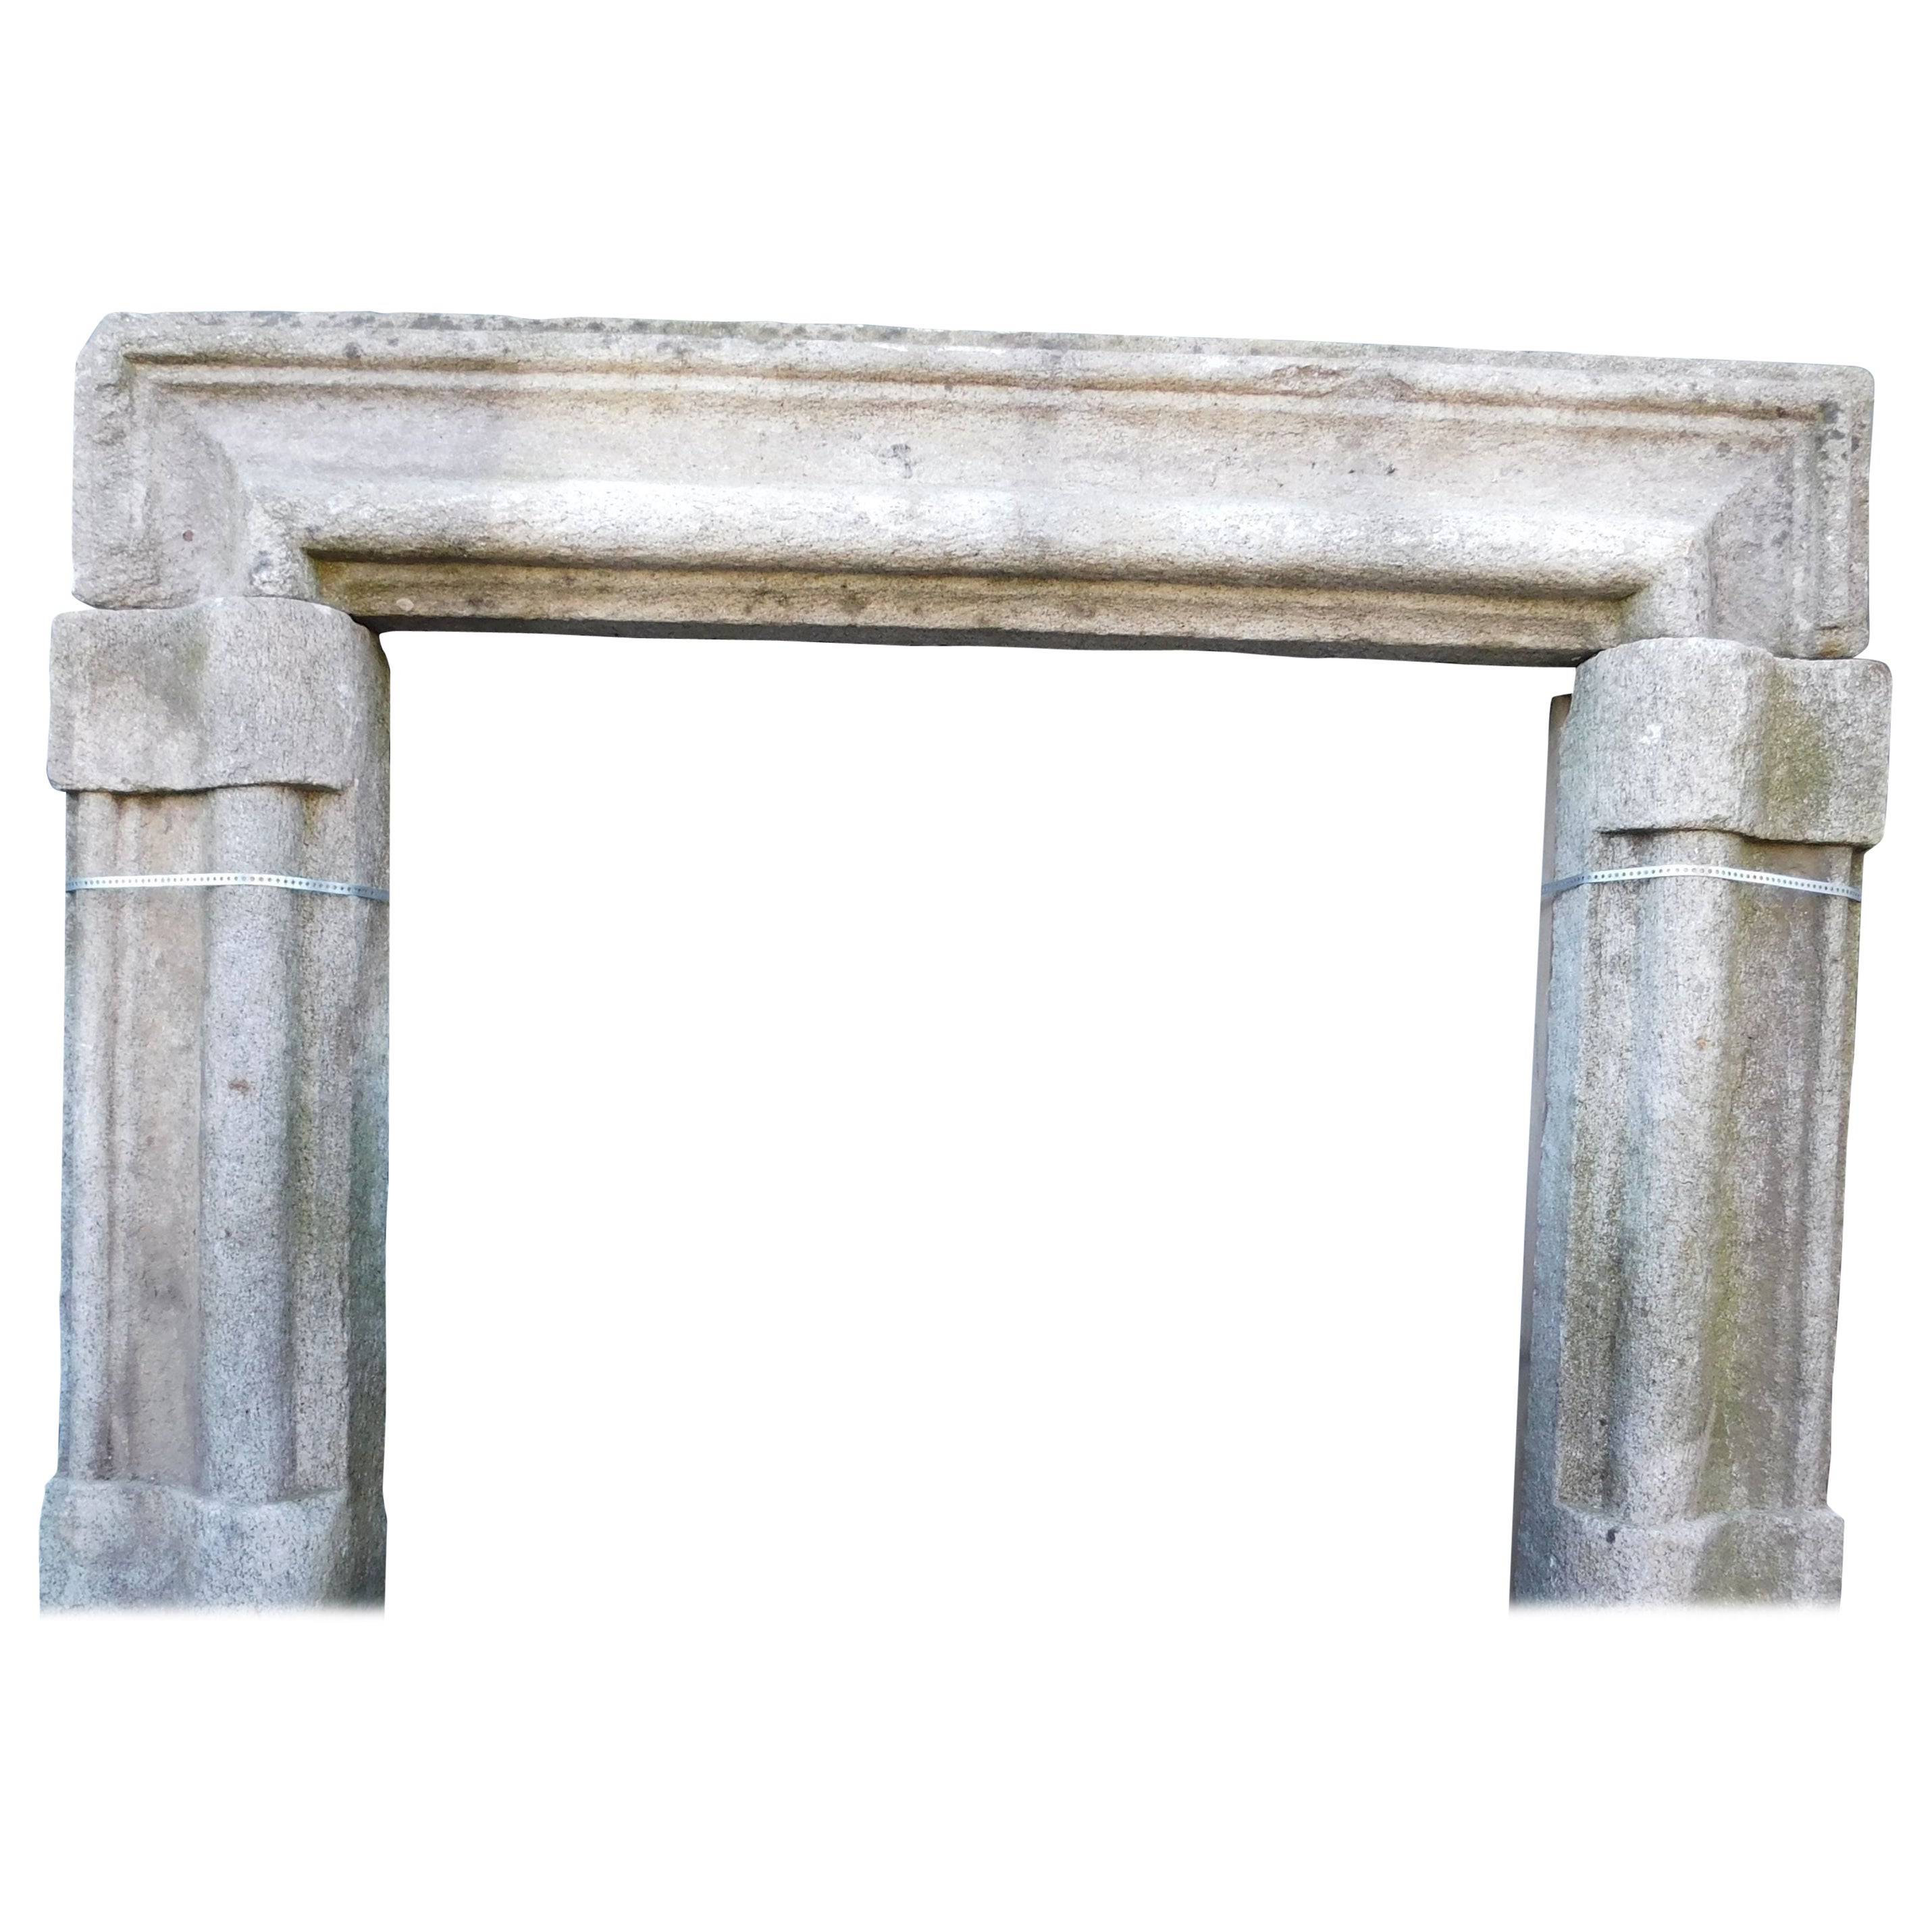 Mantle fireplace in gray stone, salvator rosa, italy For Sale